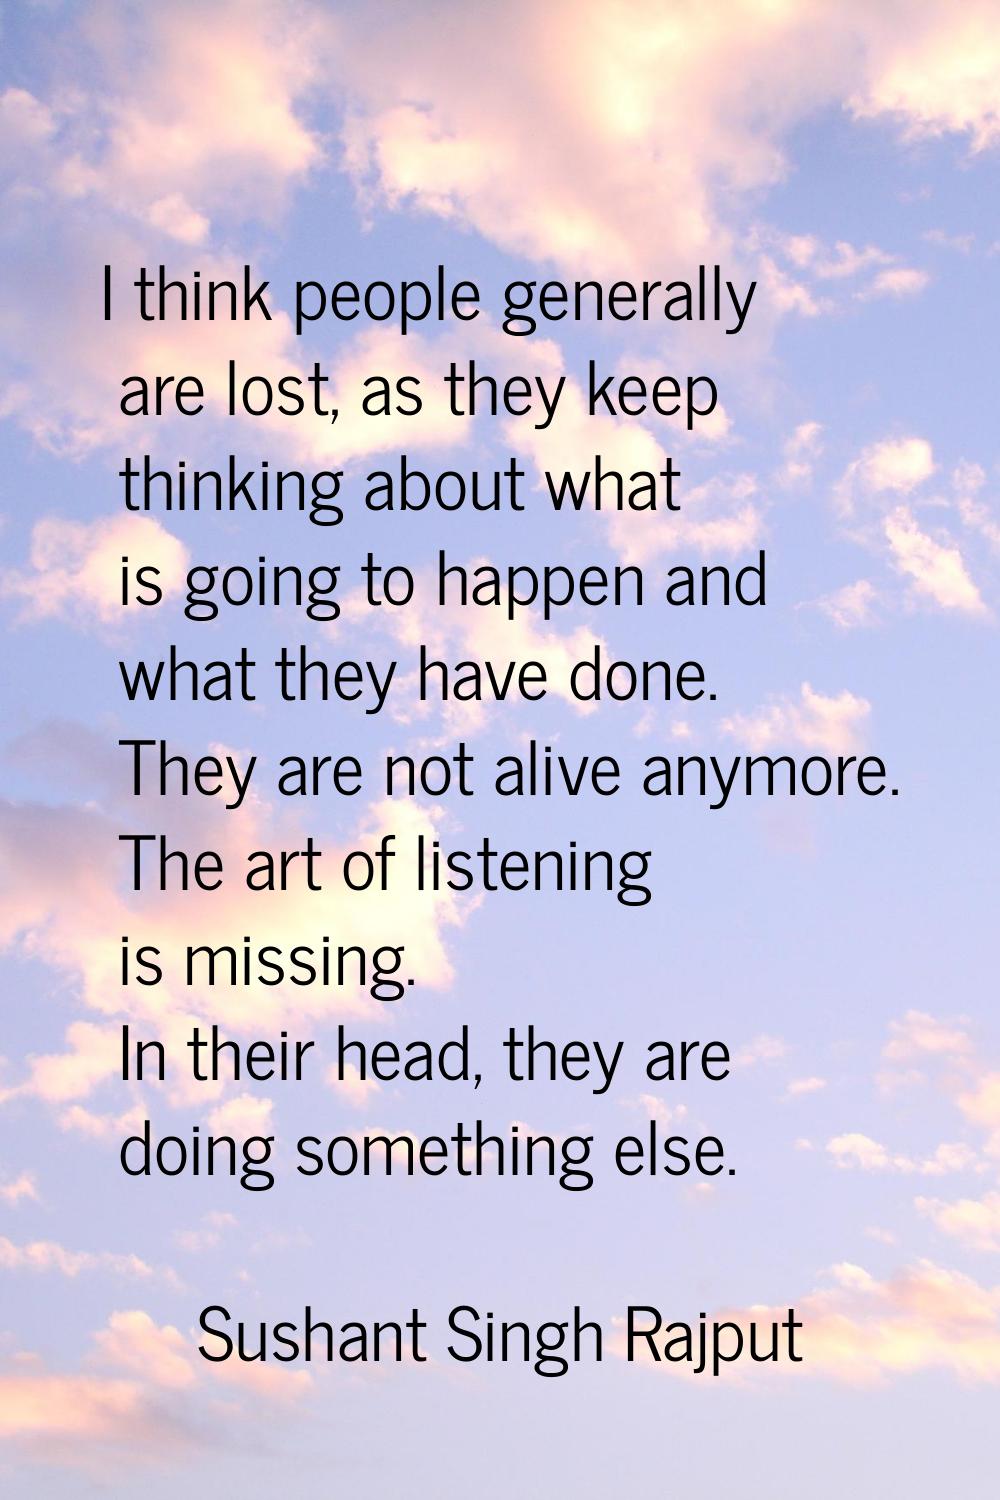 I think people generally are lost, as they keep thinking about what is going to happen and what the